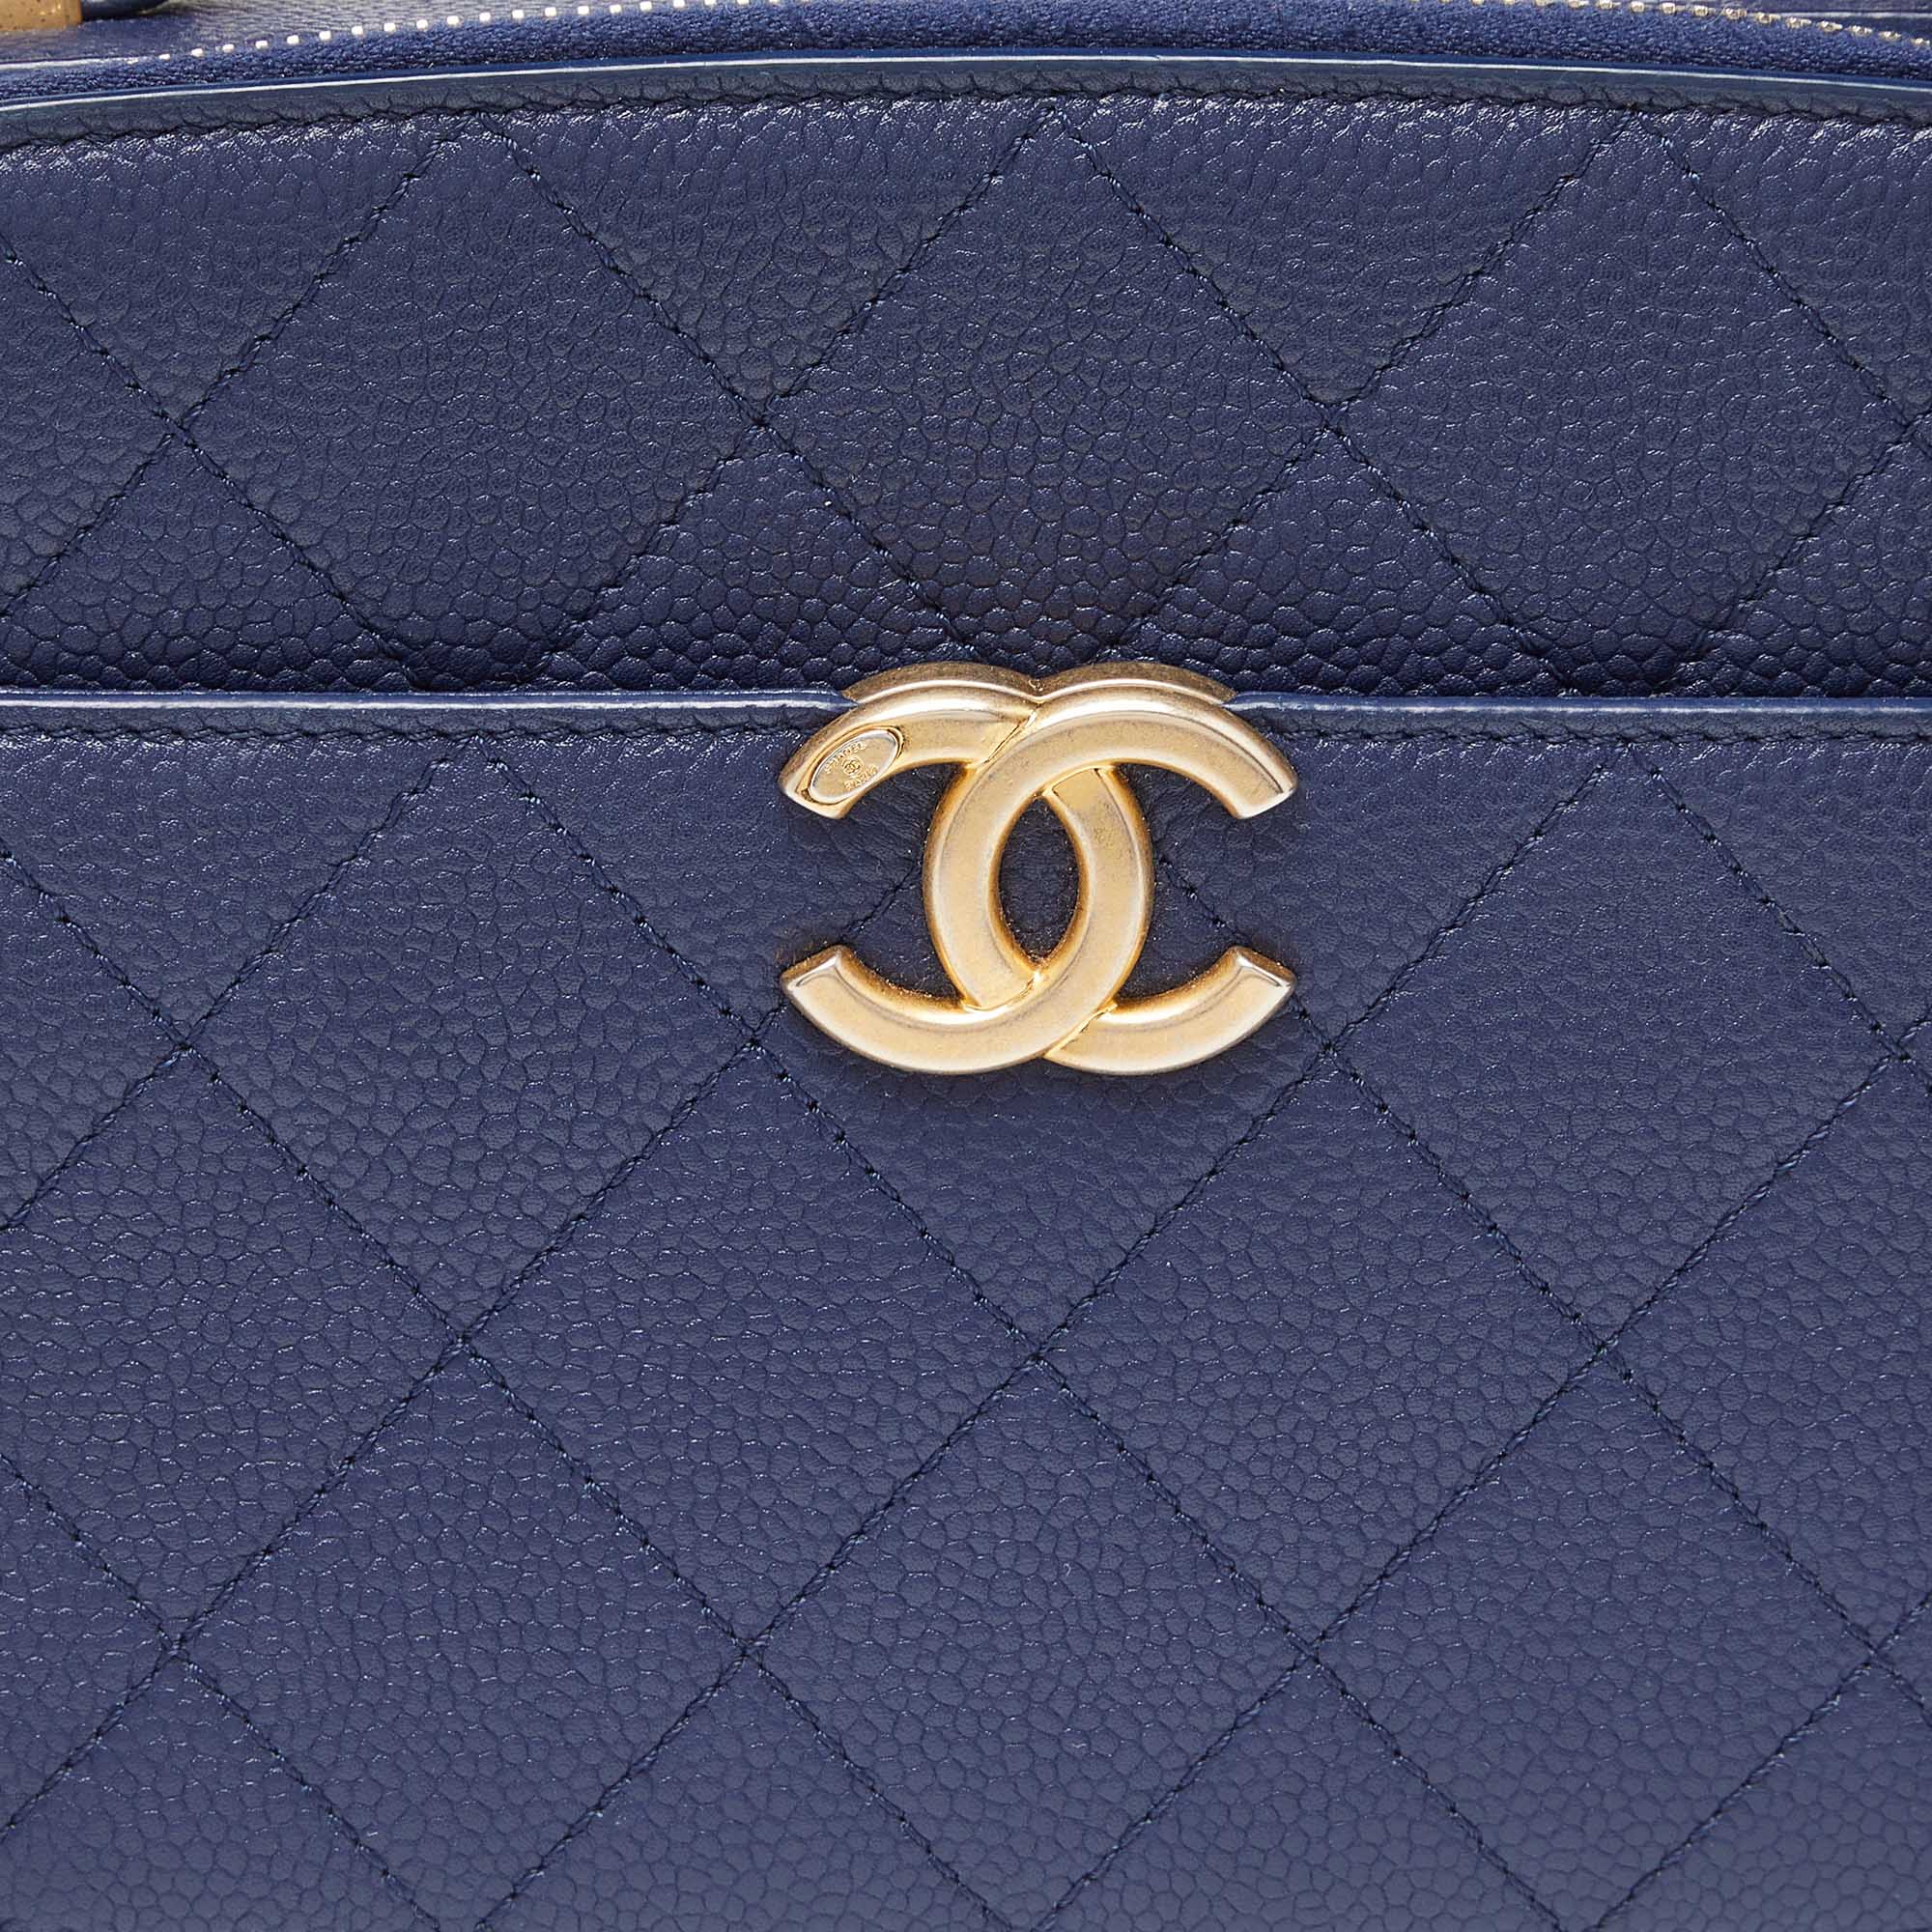 Chanel Blue Quilted Caviar Leather Business Affinity Camera Chain Bag